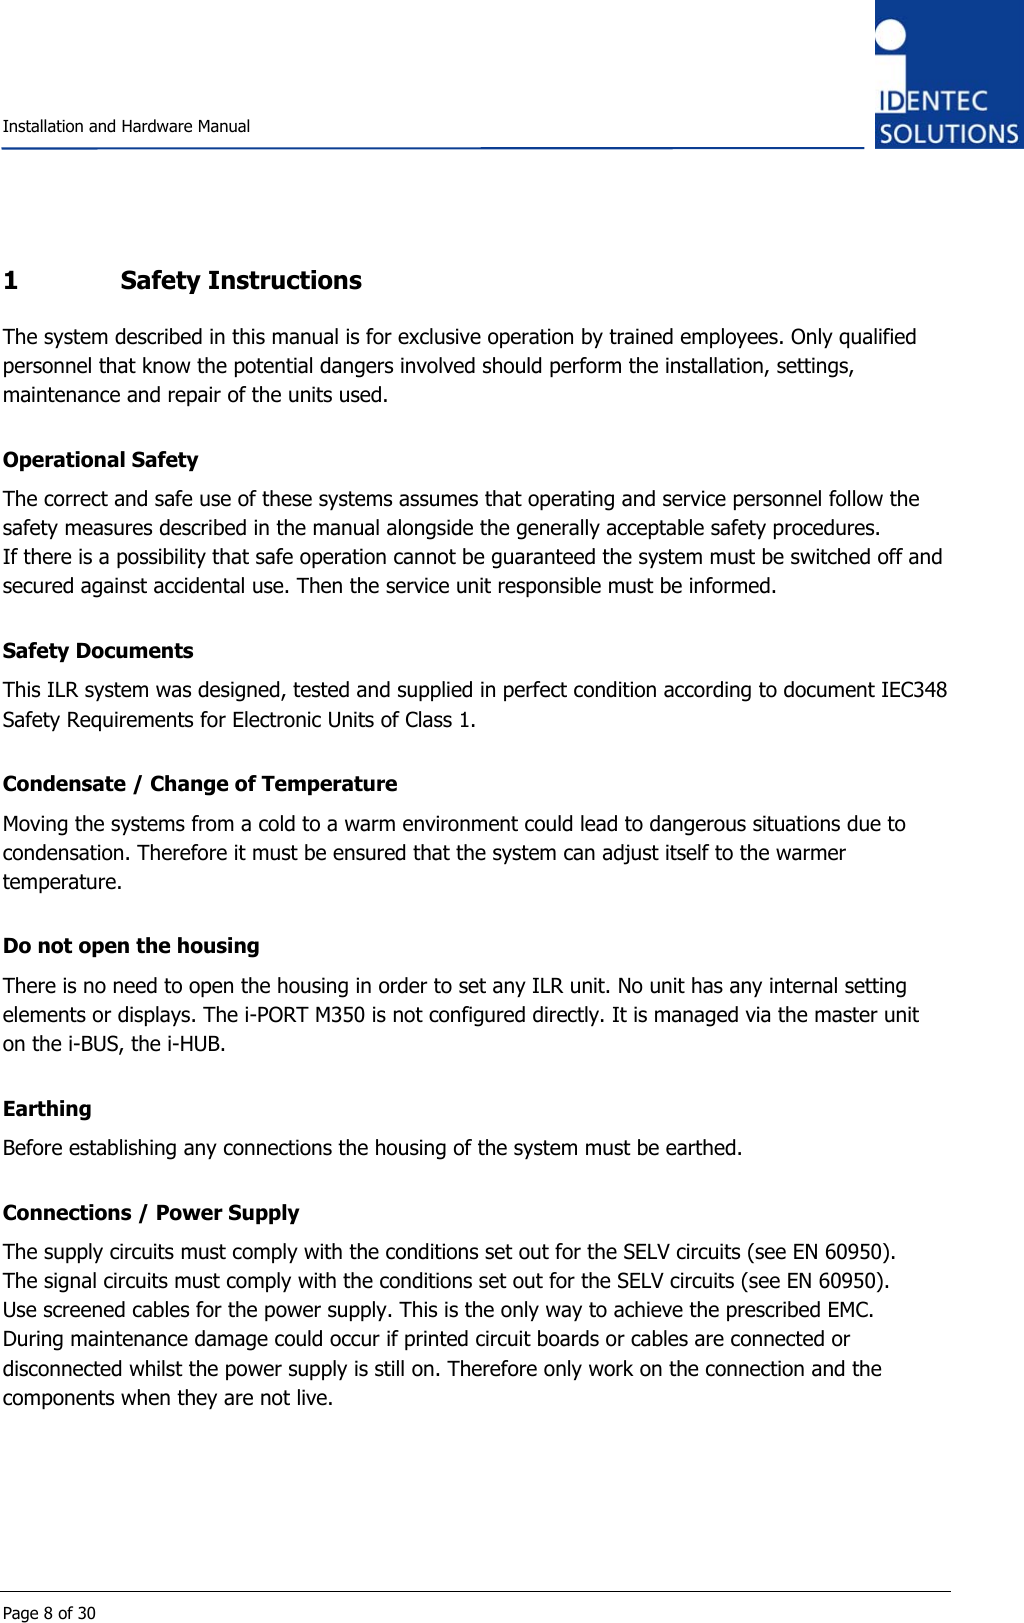    Installation and Hardware Manual  Page 8 of 30 1 Safety Instructions The system described in this manual is for exclusive operation by trained employees. Only qualified personnel that know the potential dangers involved should perform the installation, settings, maintenance and repair of the units used.  Operational Safety The correct and safe use of these systems assumes that operating and service personnel follow the safety measures described in the manual alongside the generally acceptable safety procedures. If there is a possibility that safe operation cannot be guaranteed the system must be switched off and secured against accidental use. Then the service unit responsible must be informed.  Safety Documents This ILR system was designed, tested and supplied in perfect condition according to document IEC348 Safety Requirements for Electronic Units of Class 1.  Condensate / Change of Temperature Moving the systems from a cold to a warm environment could lead to dangerous situations due to condensation. Therefore it must be ensured that the system can adjust itself to the warmer temperature.  Do not open the housing There is no need to open the housing in order to set any ILR unit. No unit has any internal setting elements or displays. The i-PORT M350 is not configured directly. It is managed via the master unit on the i-BUS, the i-HUB.  Earthing Before establishing any connections the housing of the system must be earthed.  Connections / Power Supply The supply circuits must comply with the conditions set out for the SELV circuits (see EN 60950). The signal circuits must comply with the conditions set out for the SELV circuits (see EN 60950). Use screened cables for the power supply. This is the only way to achieve the prescribed EMC. During maintenance damage could occur if printed circuit boards or cables are connected or disconnected whilst the power supply is still on. Therefore only work on the connection and the components when they are not live.    